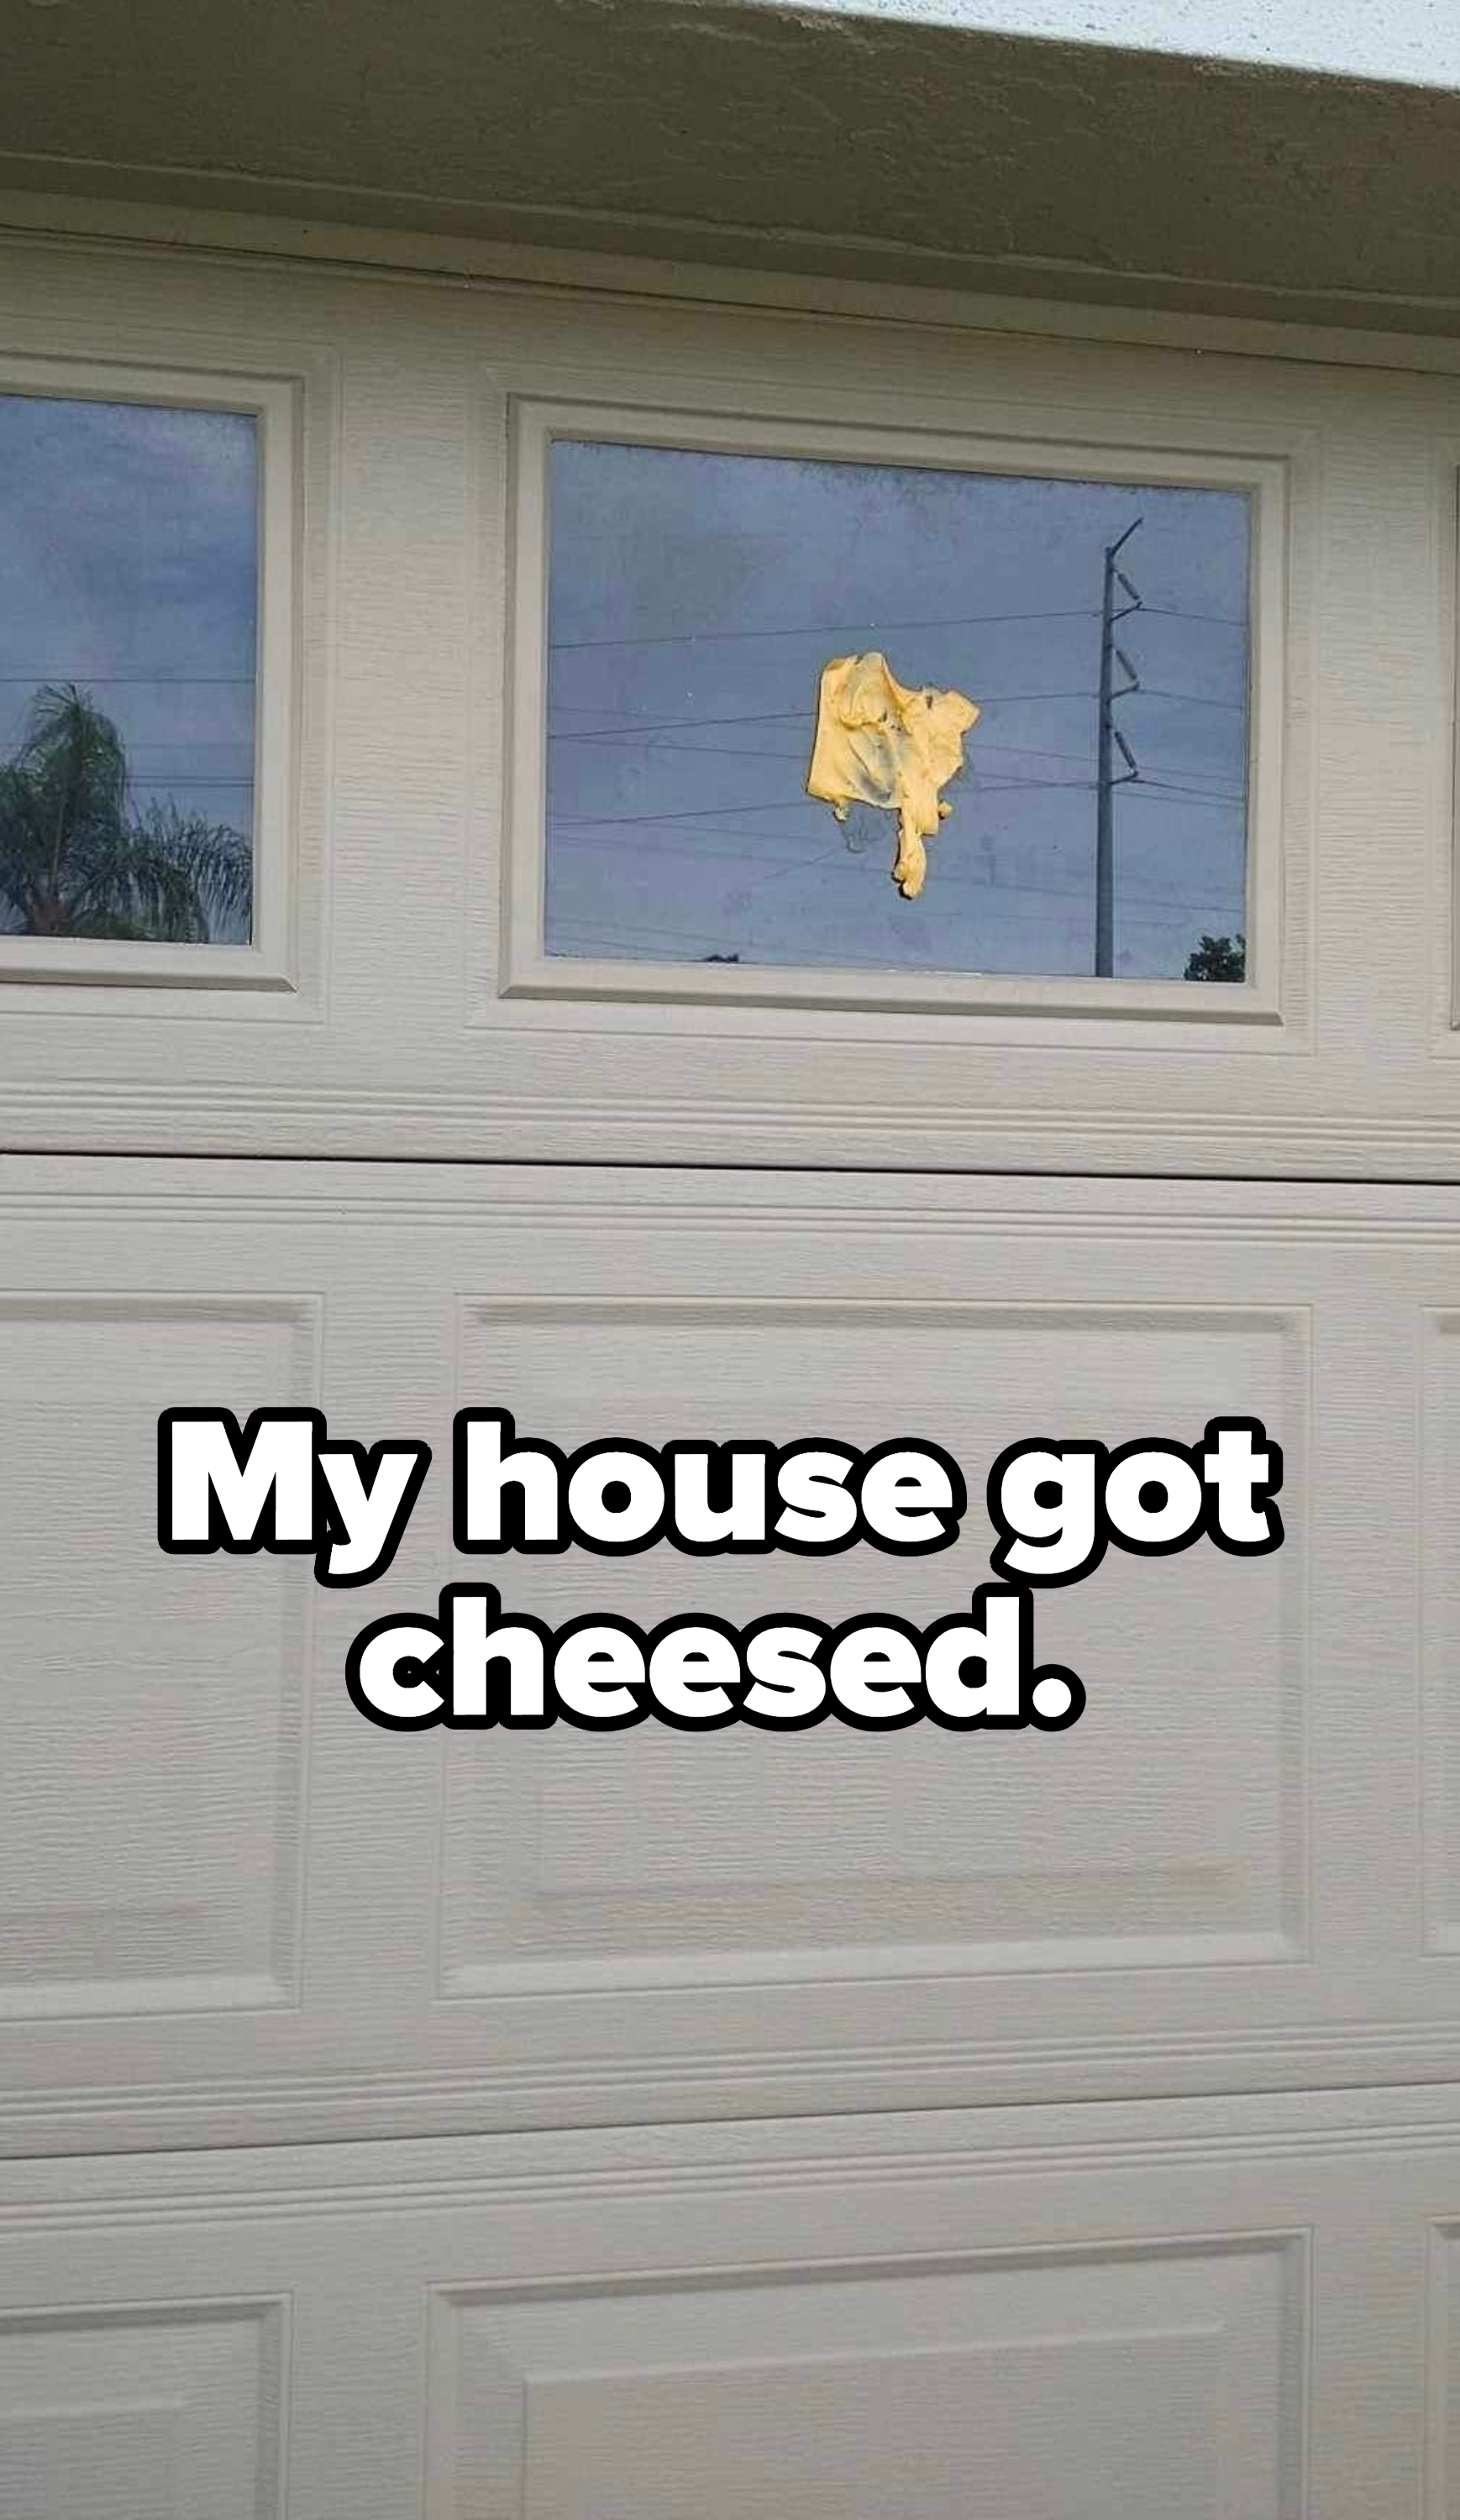 &quot;My house got cheesed.&quot;